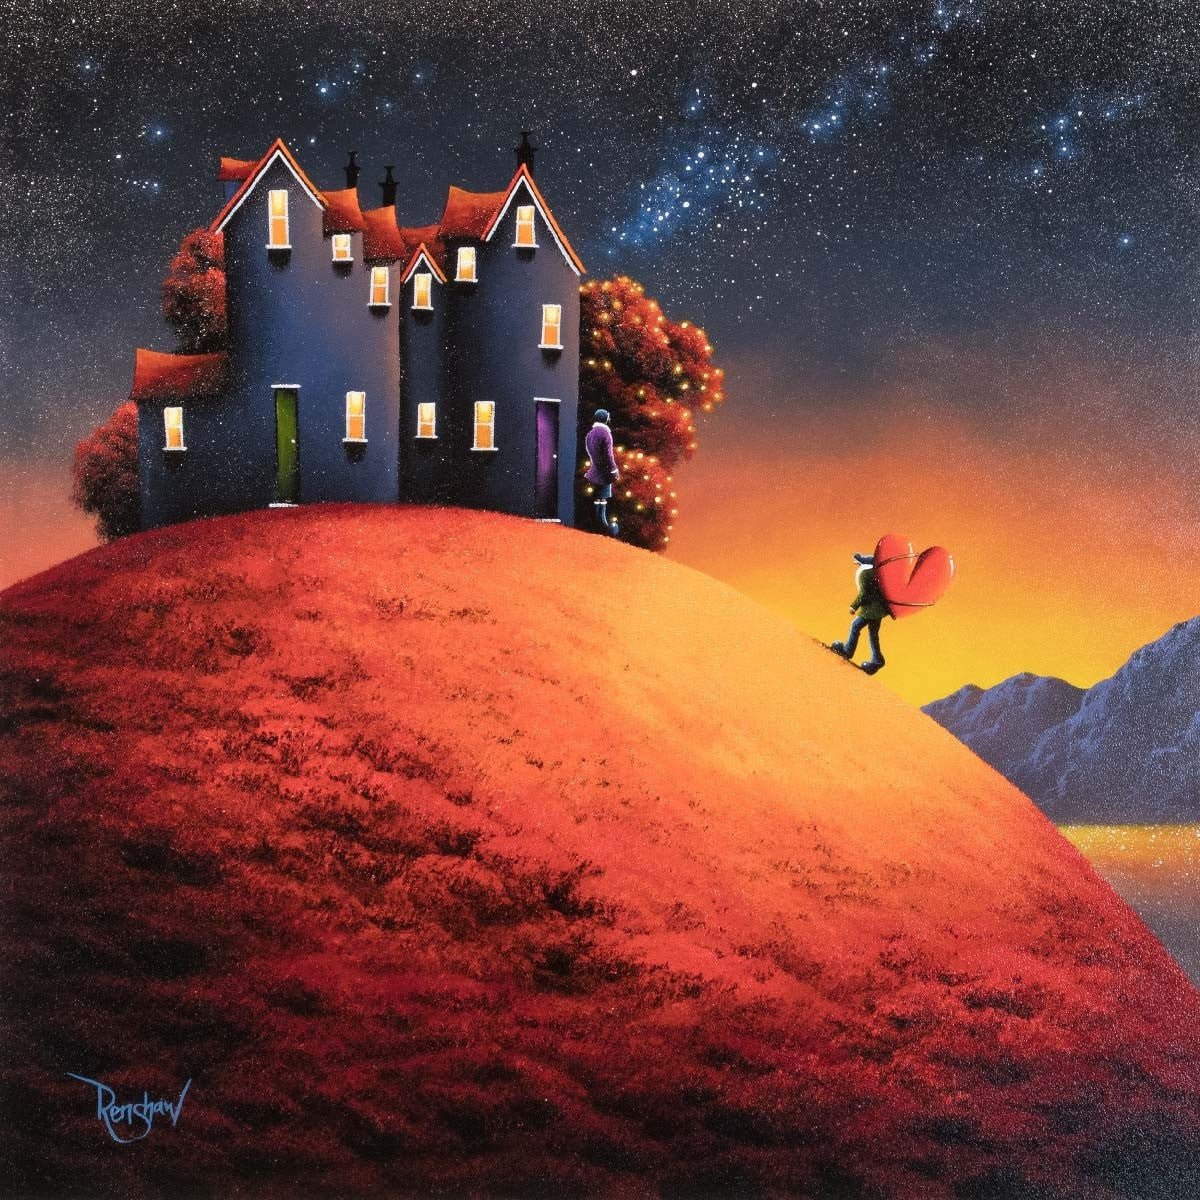 Where There's a Will - SOLD David Renshaw